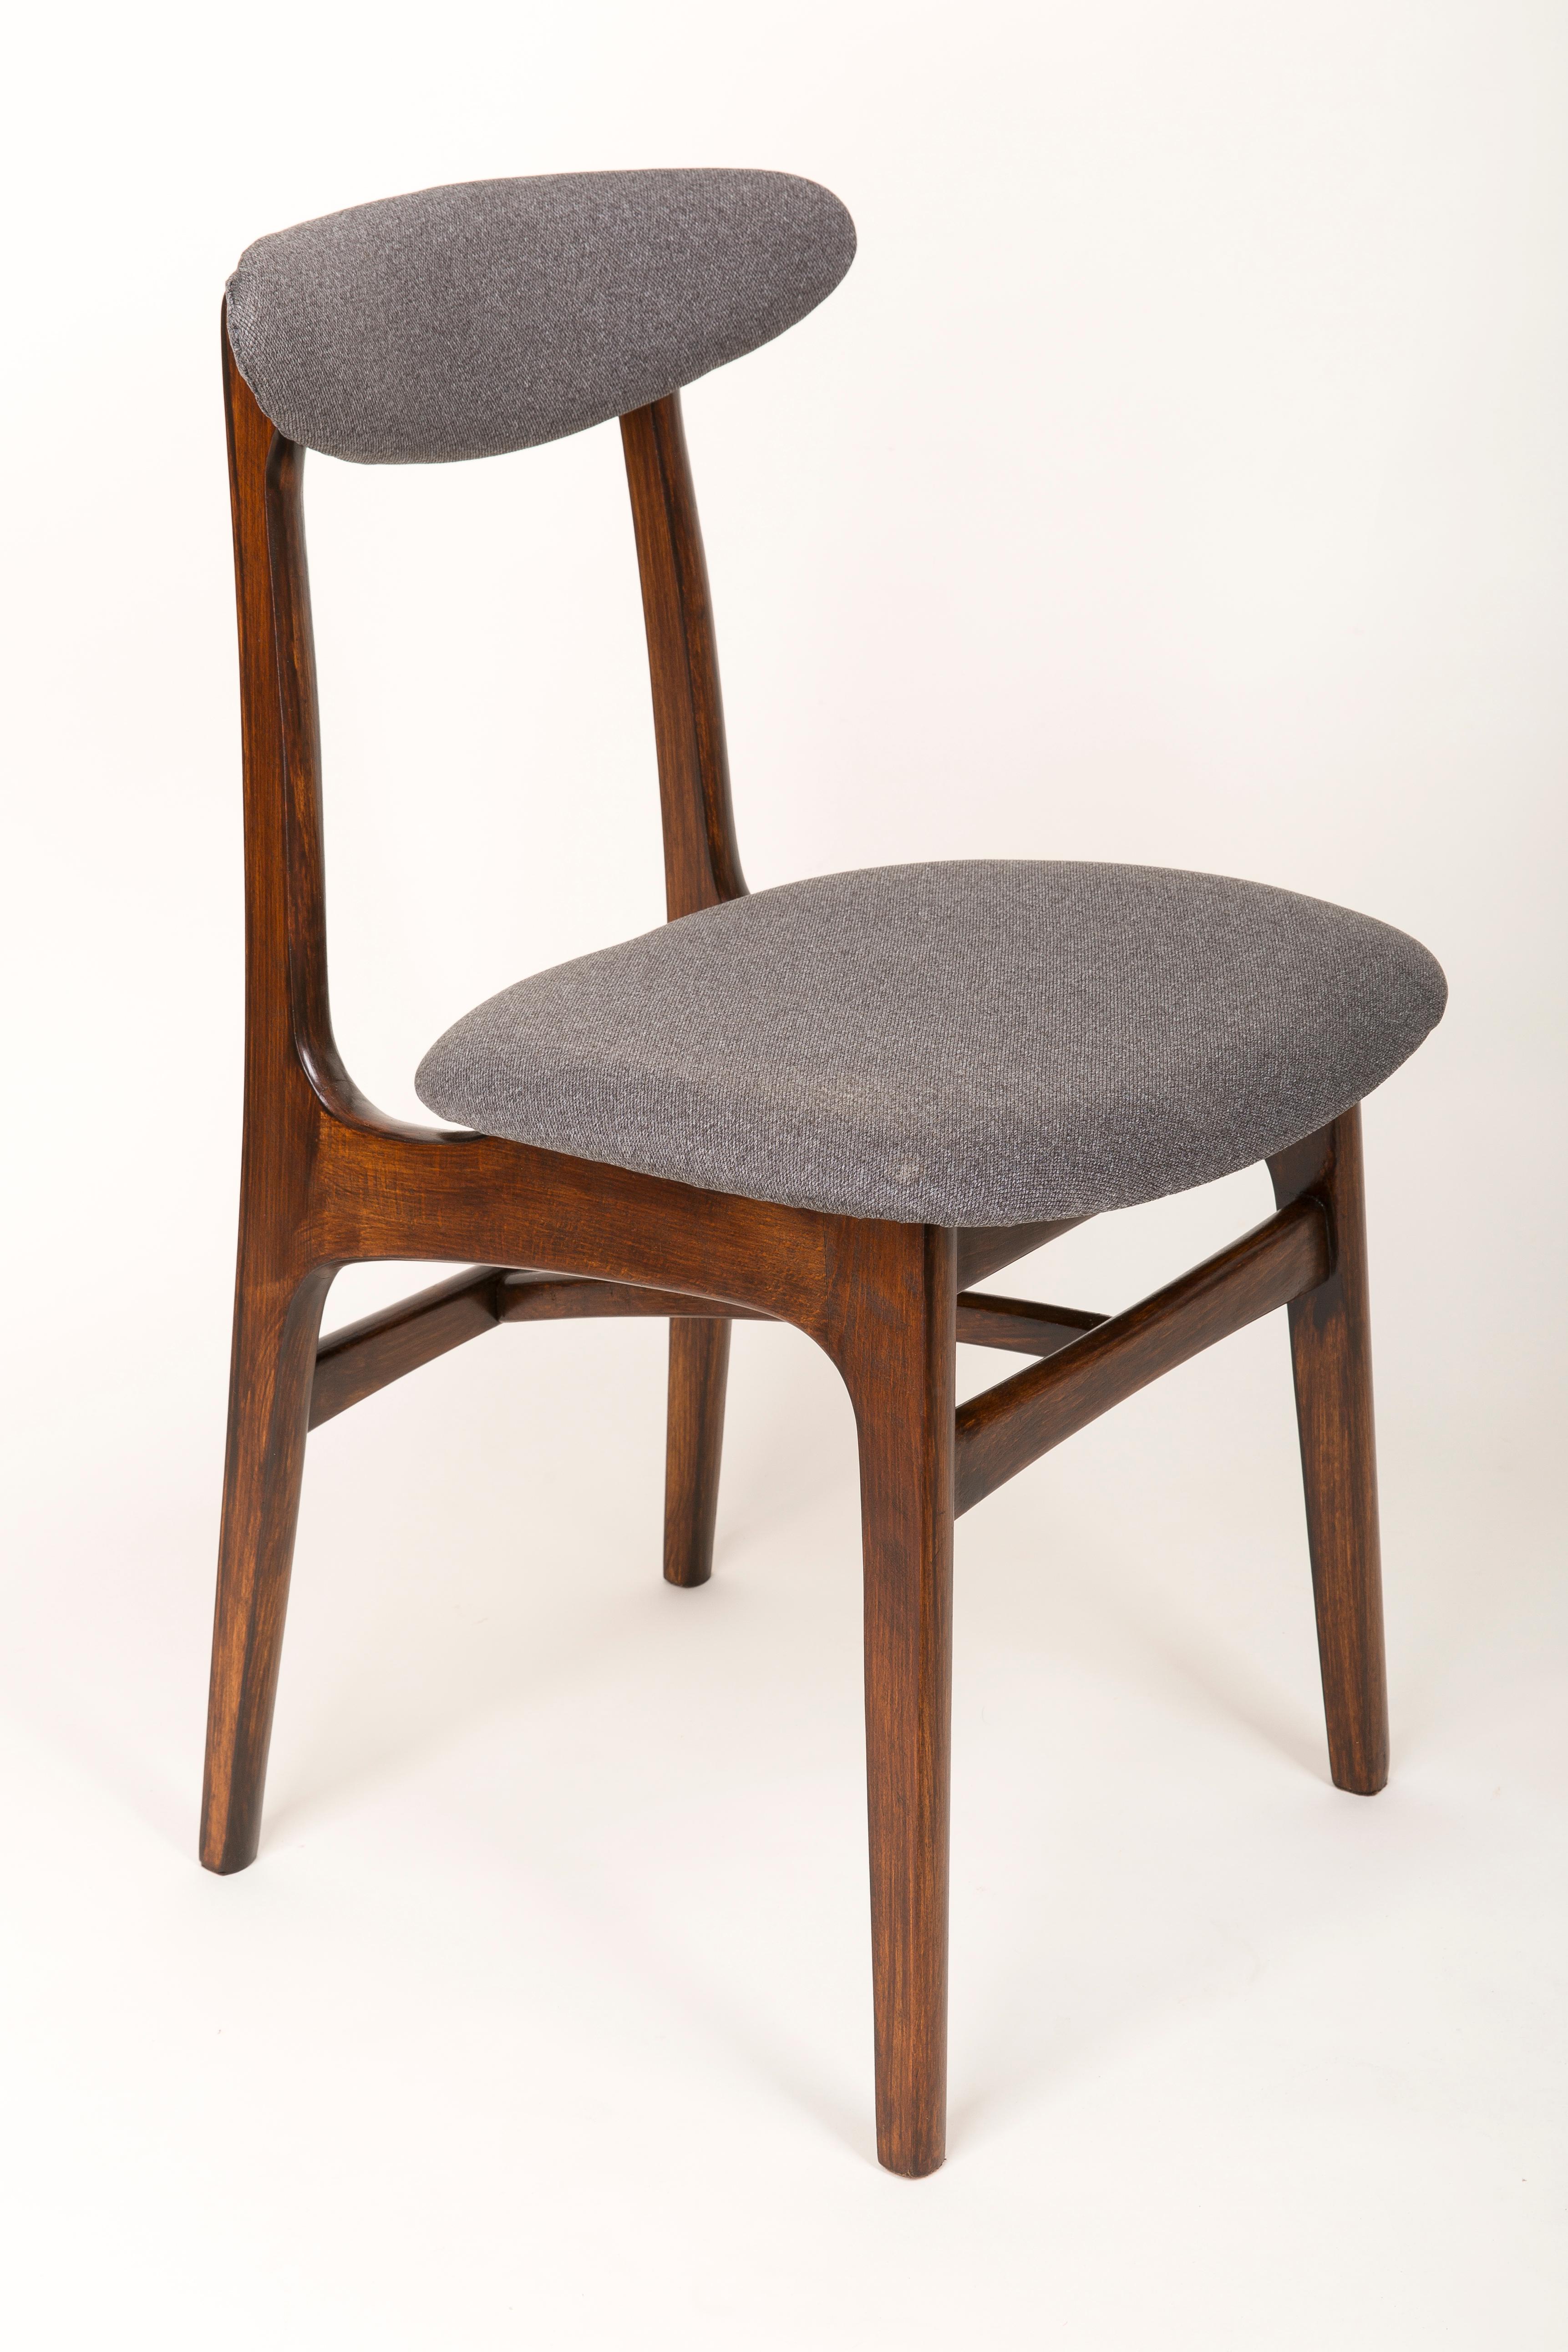 Hand-Crafted Set of Six 20th Century Rajmund Halas Chairs, Europe, 1960s For Sale